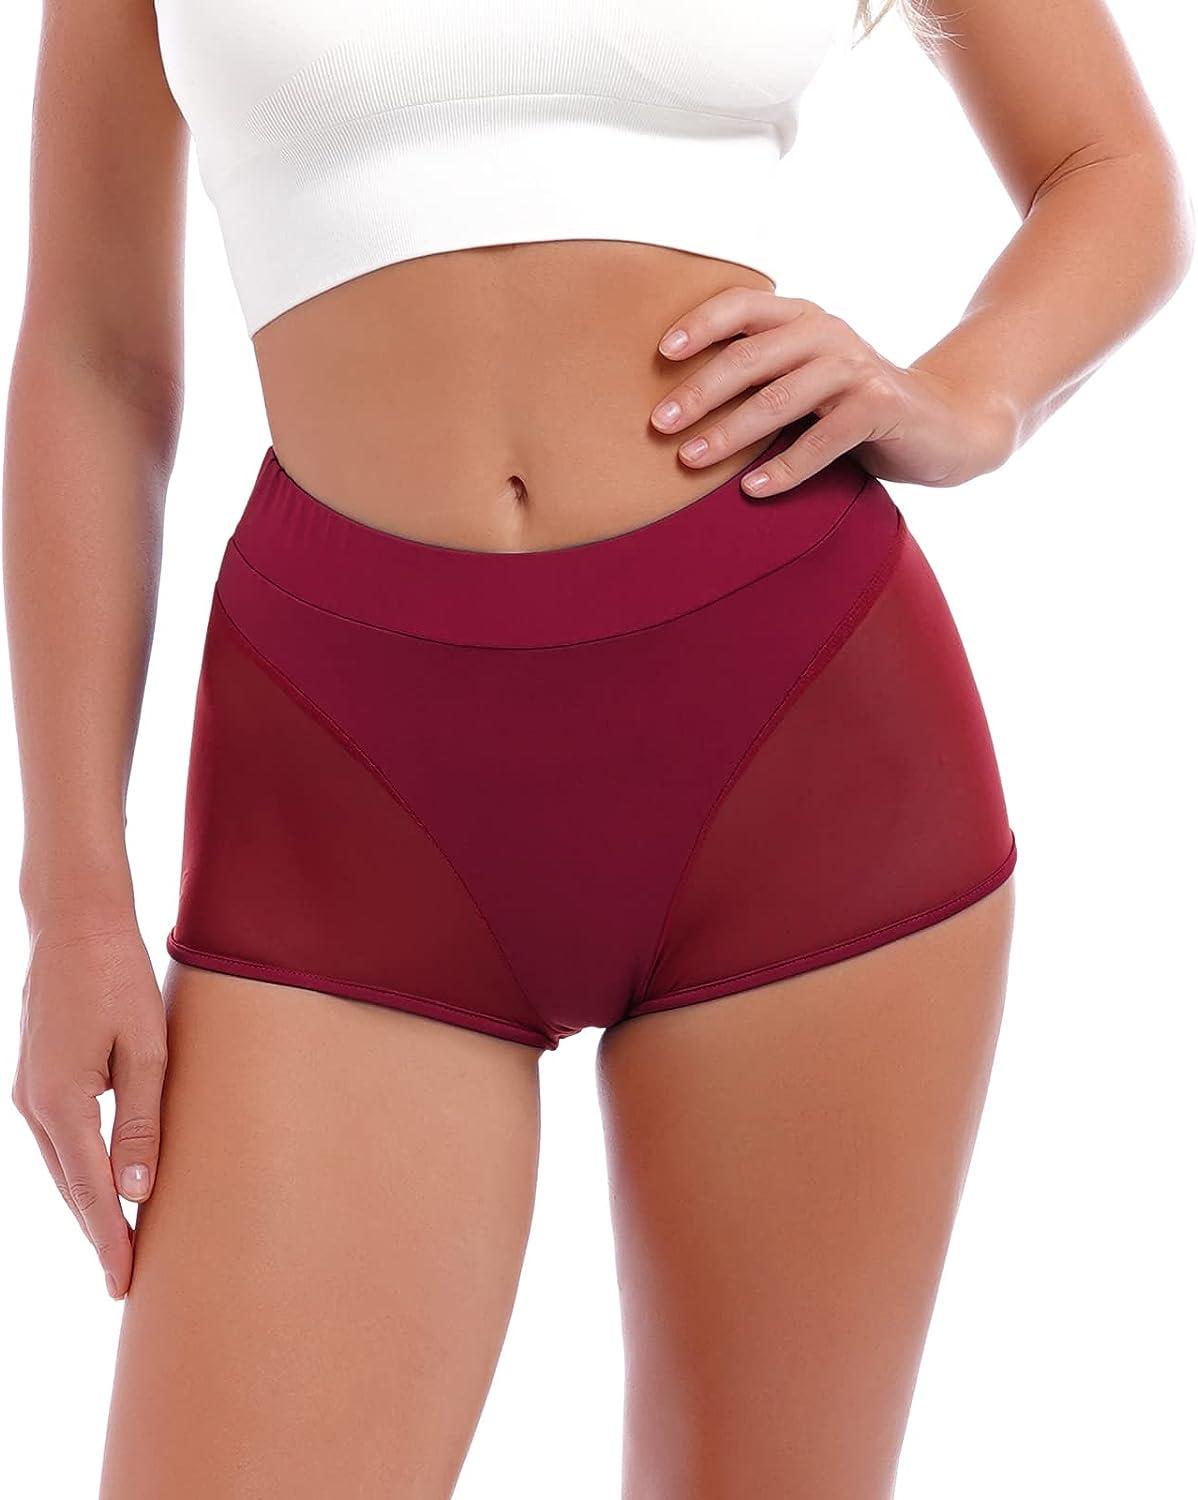 High-waisted Exercise Shorts Get Rave Reviews On